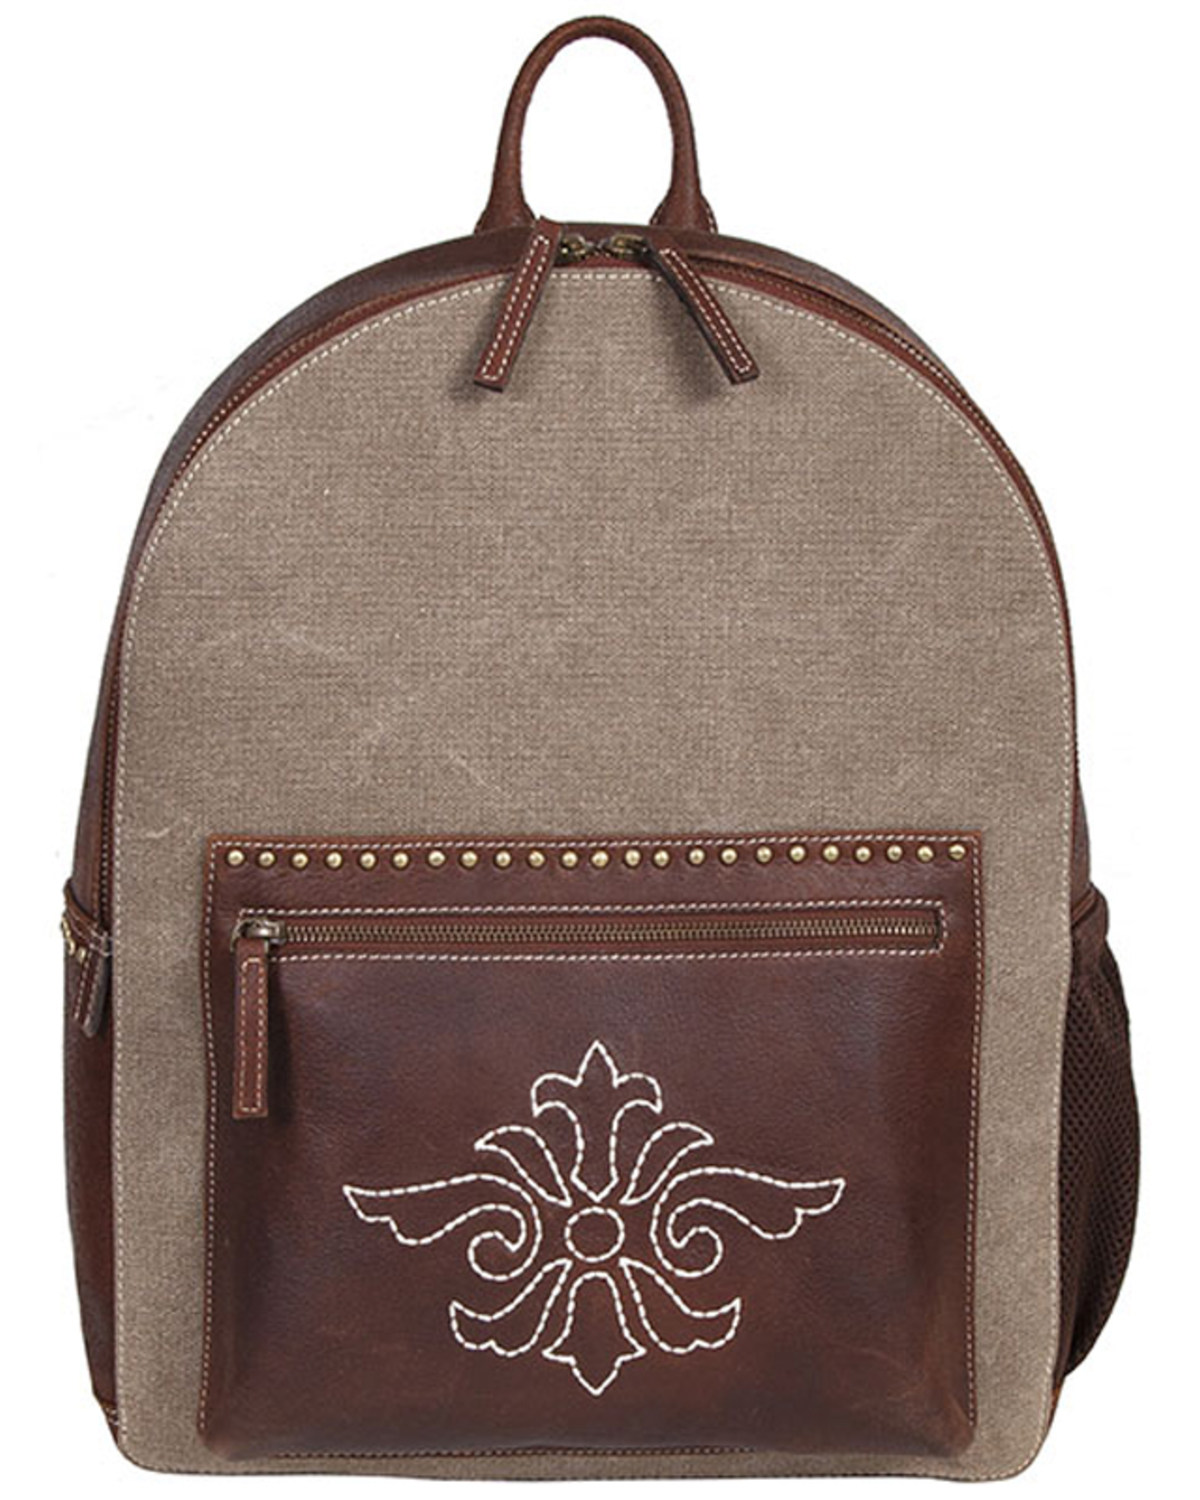 Scully Canvas and Leather Studded and Floral Embroidered Backpack